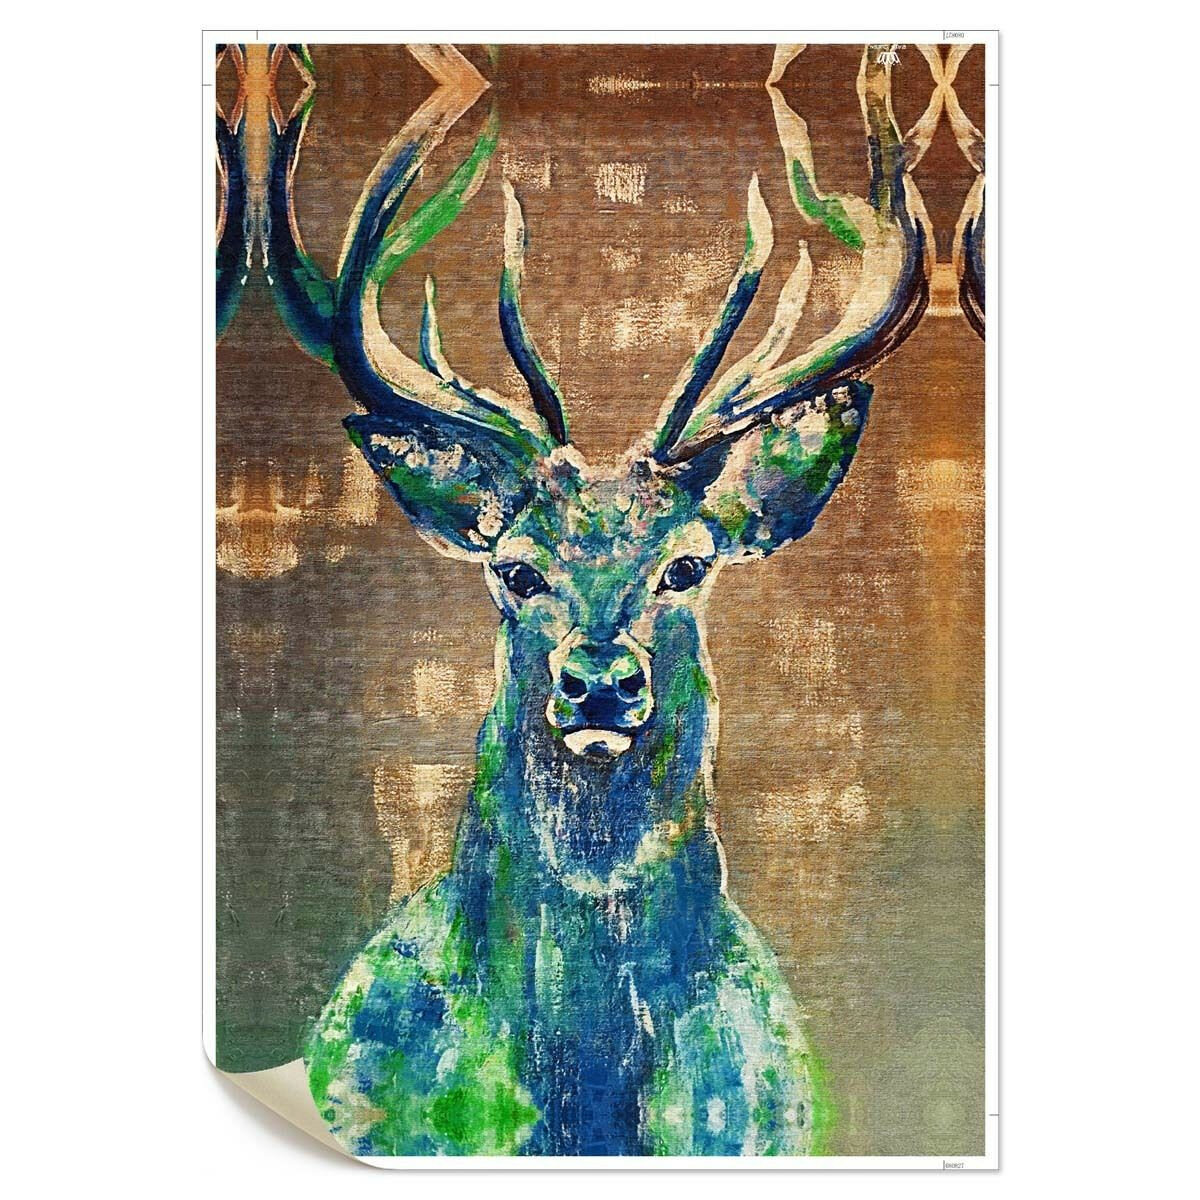 

1 Piece Wall Decorative Painting Deer Canvas Print Art Pictures Frameless Wall Hanging Decorations for Home Office